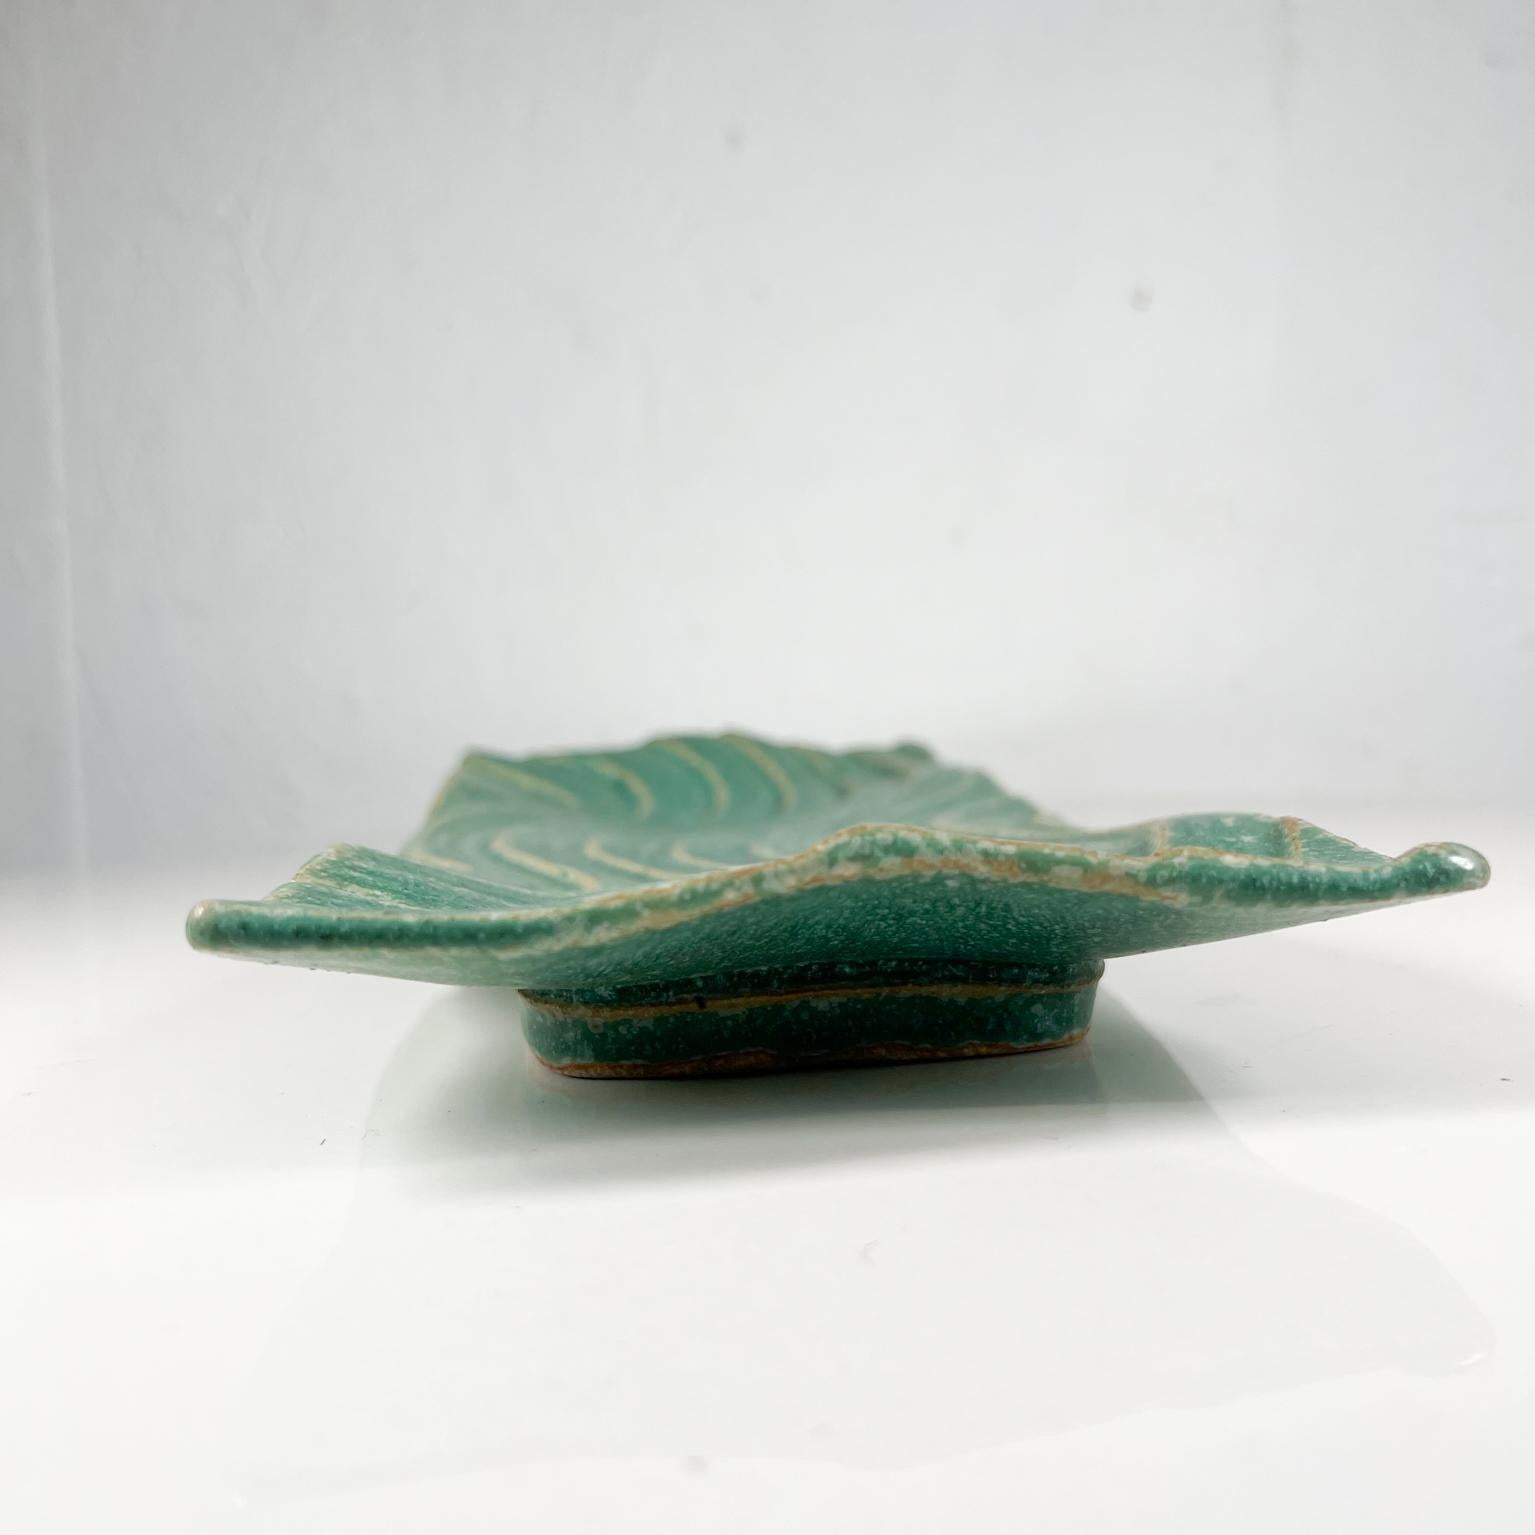 1970s Sculptural Green Wave Dish Studio Pottery Art Ed Thompson For Sale 3